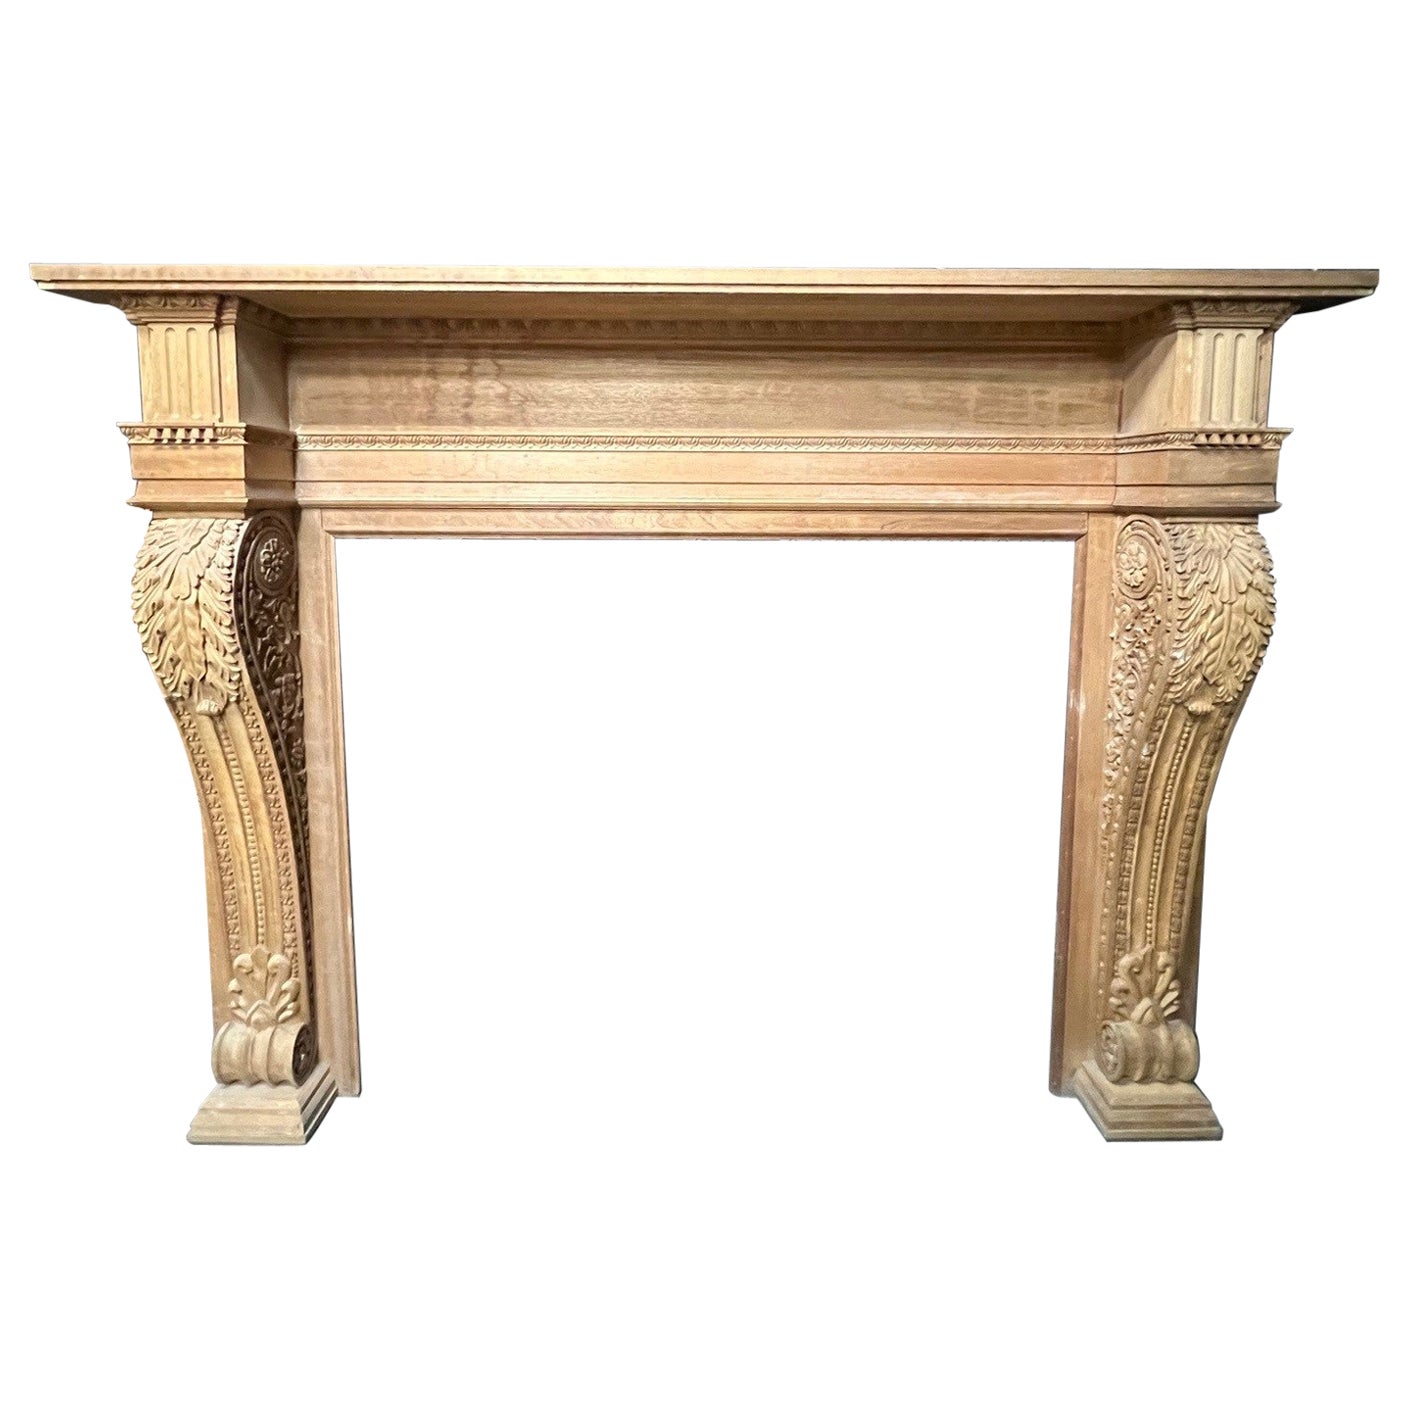 Oversize Carved Wood Fireplace Mantel with Acanthus Leaf Corbels.  